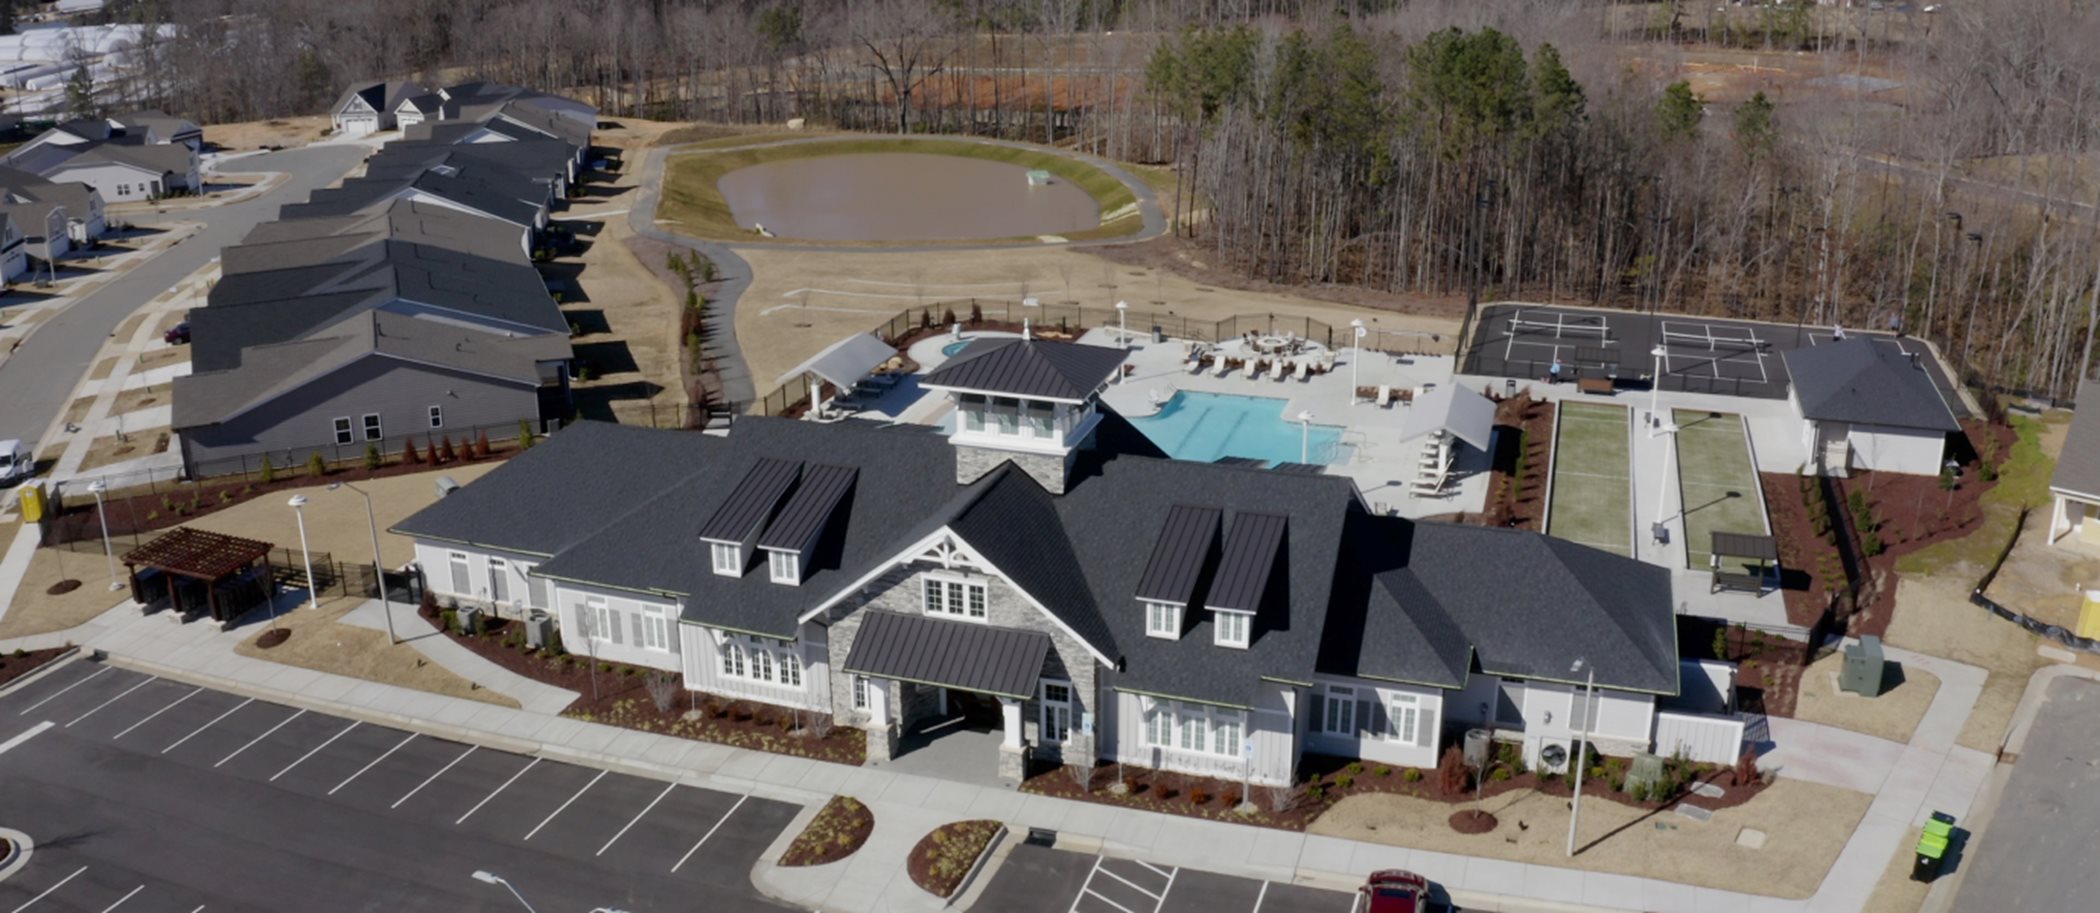 Aerial view of Auburn Village Clubhouse and Swimming Pool